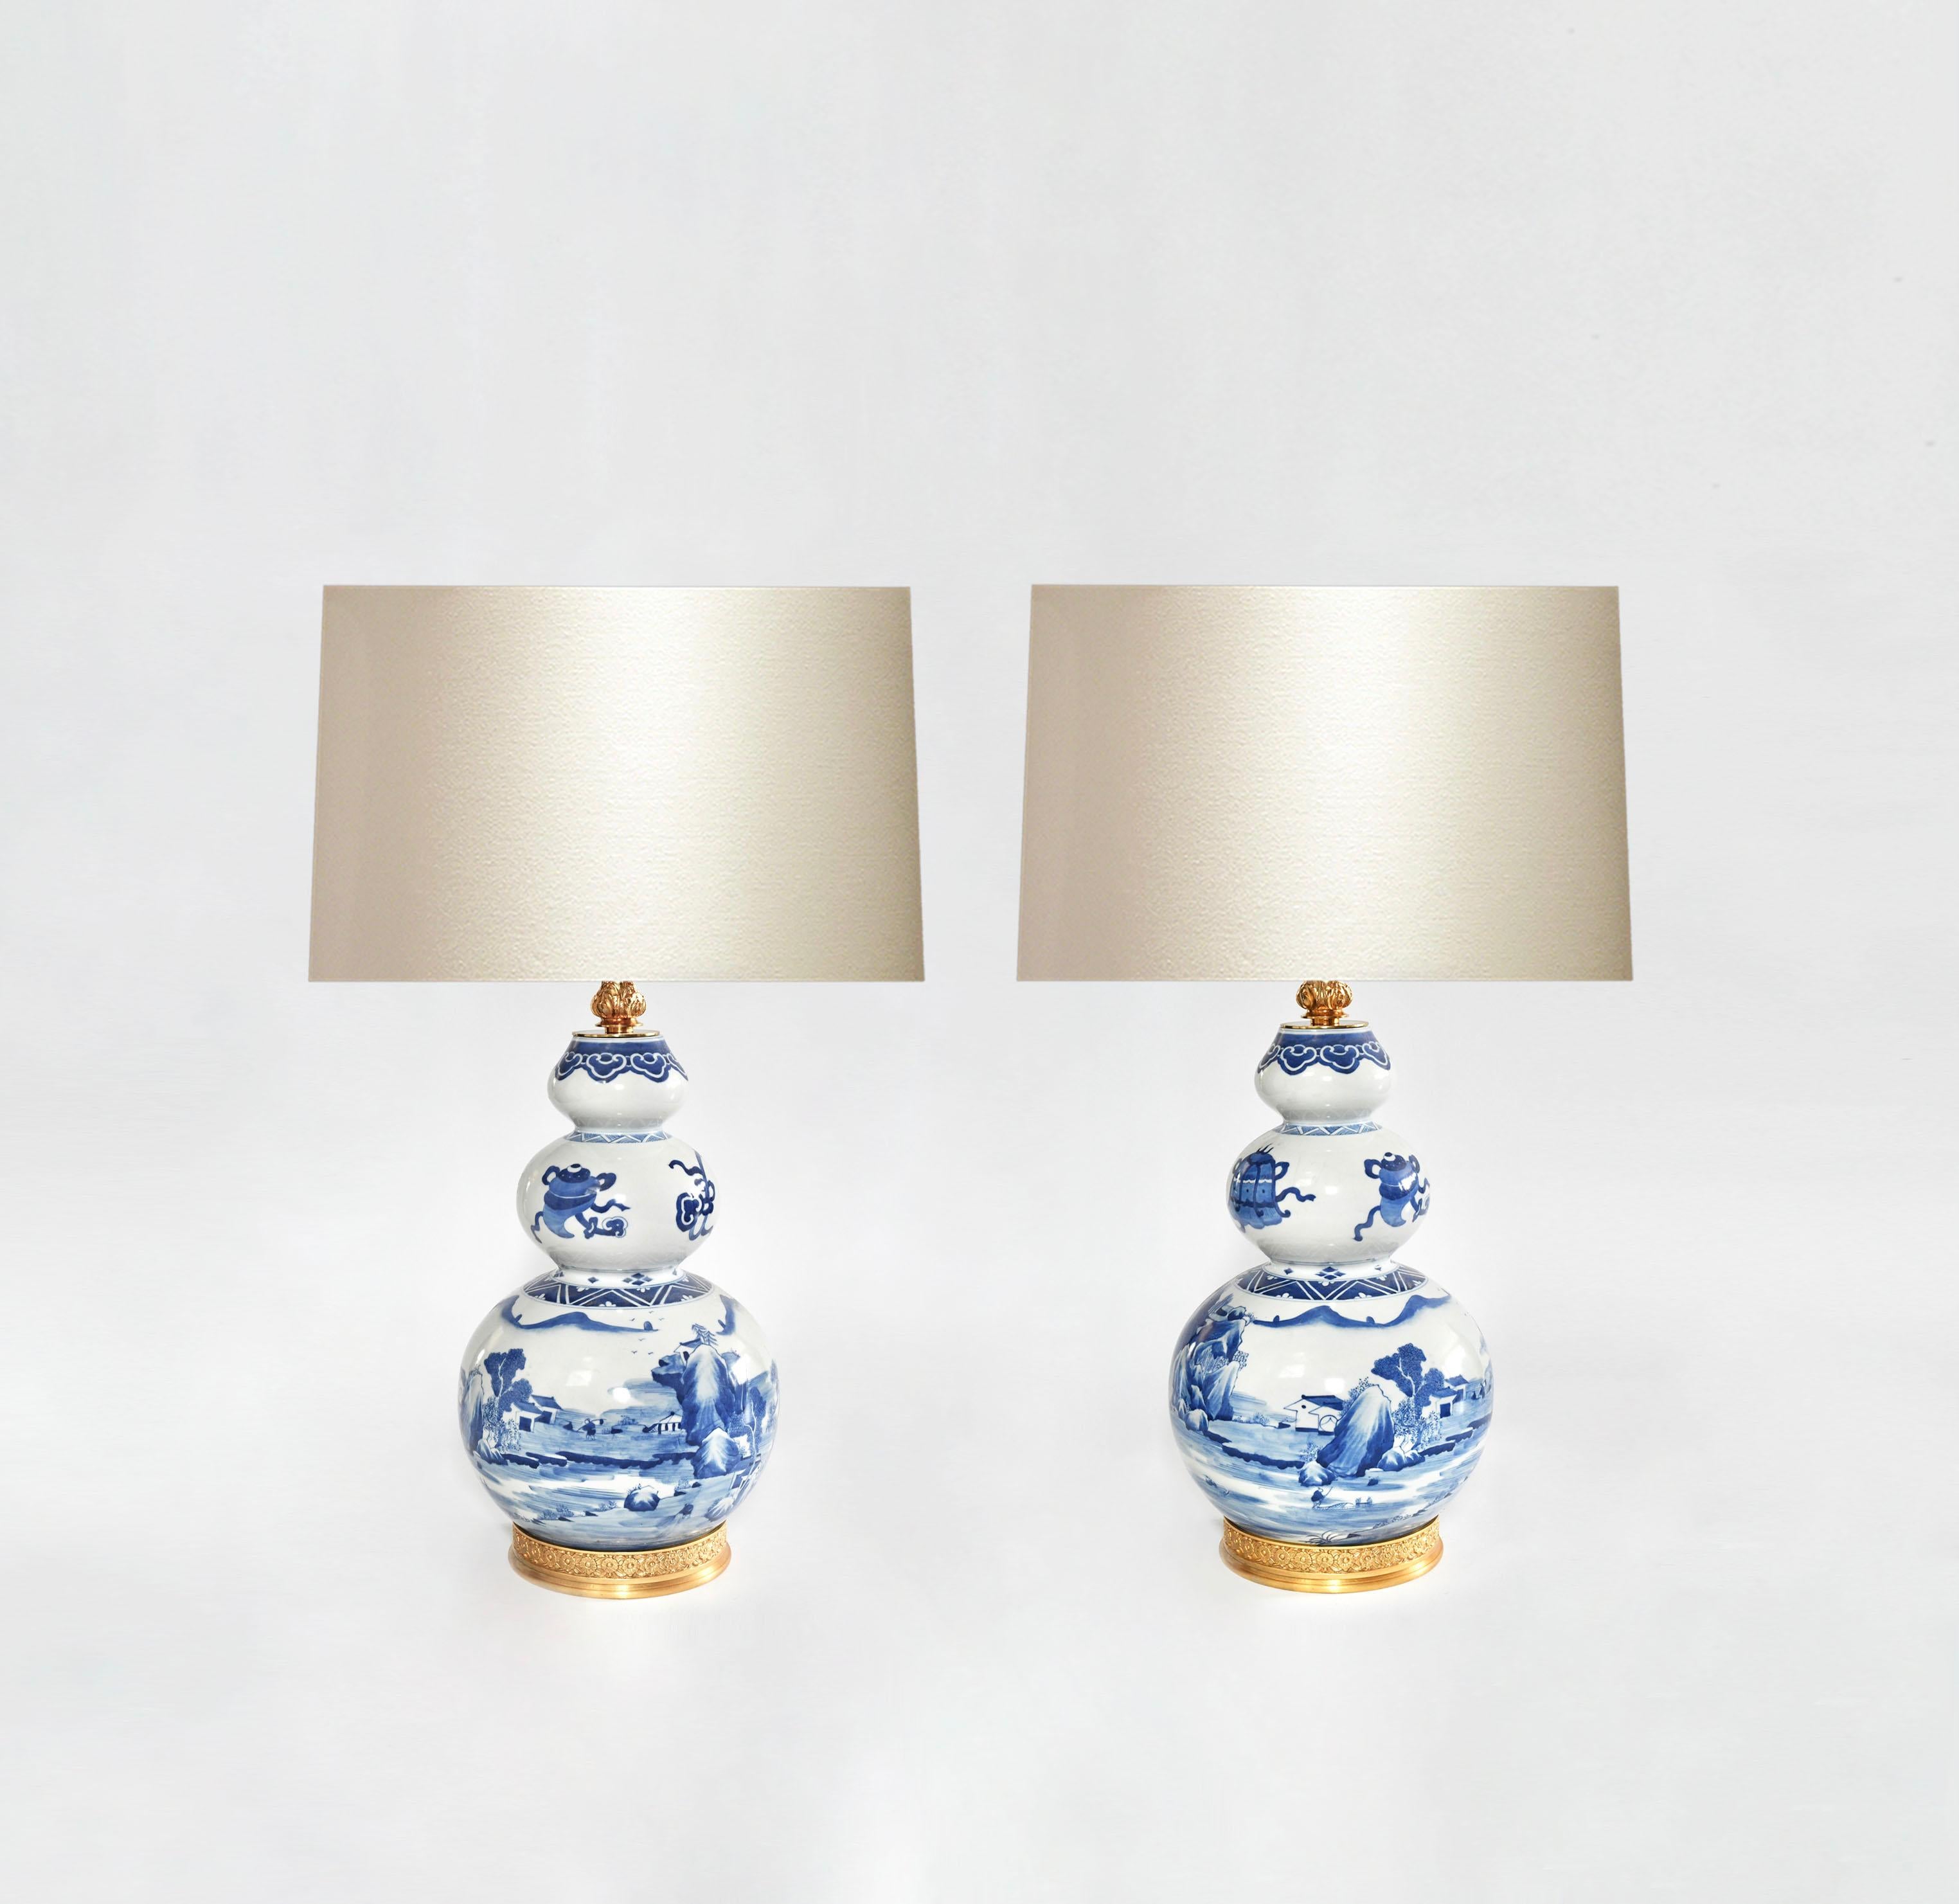 Contemporary Pair of Blue and White Porcelain Lamps